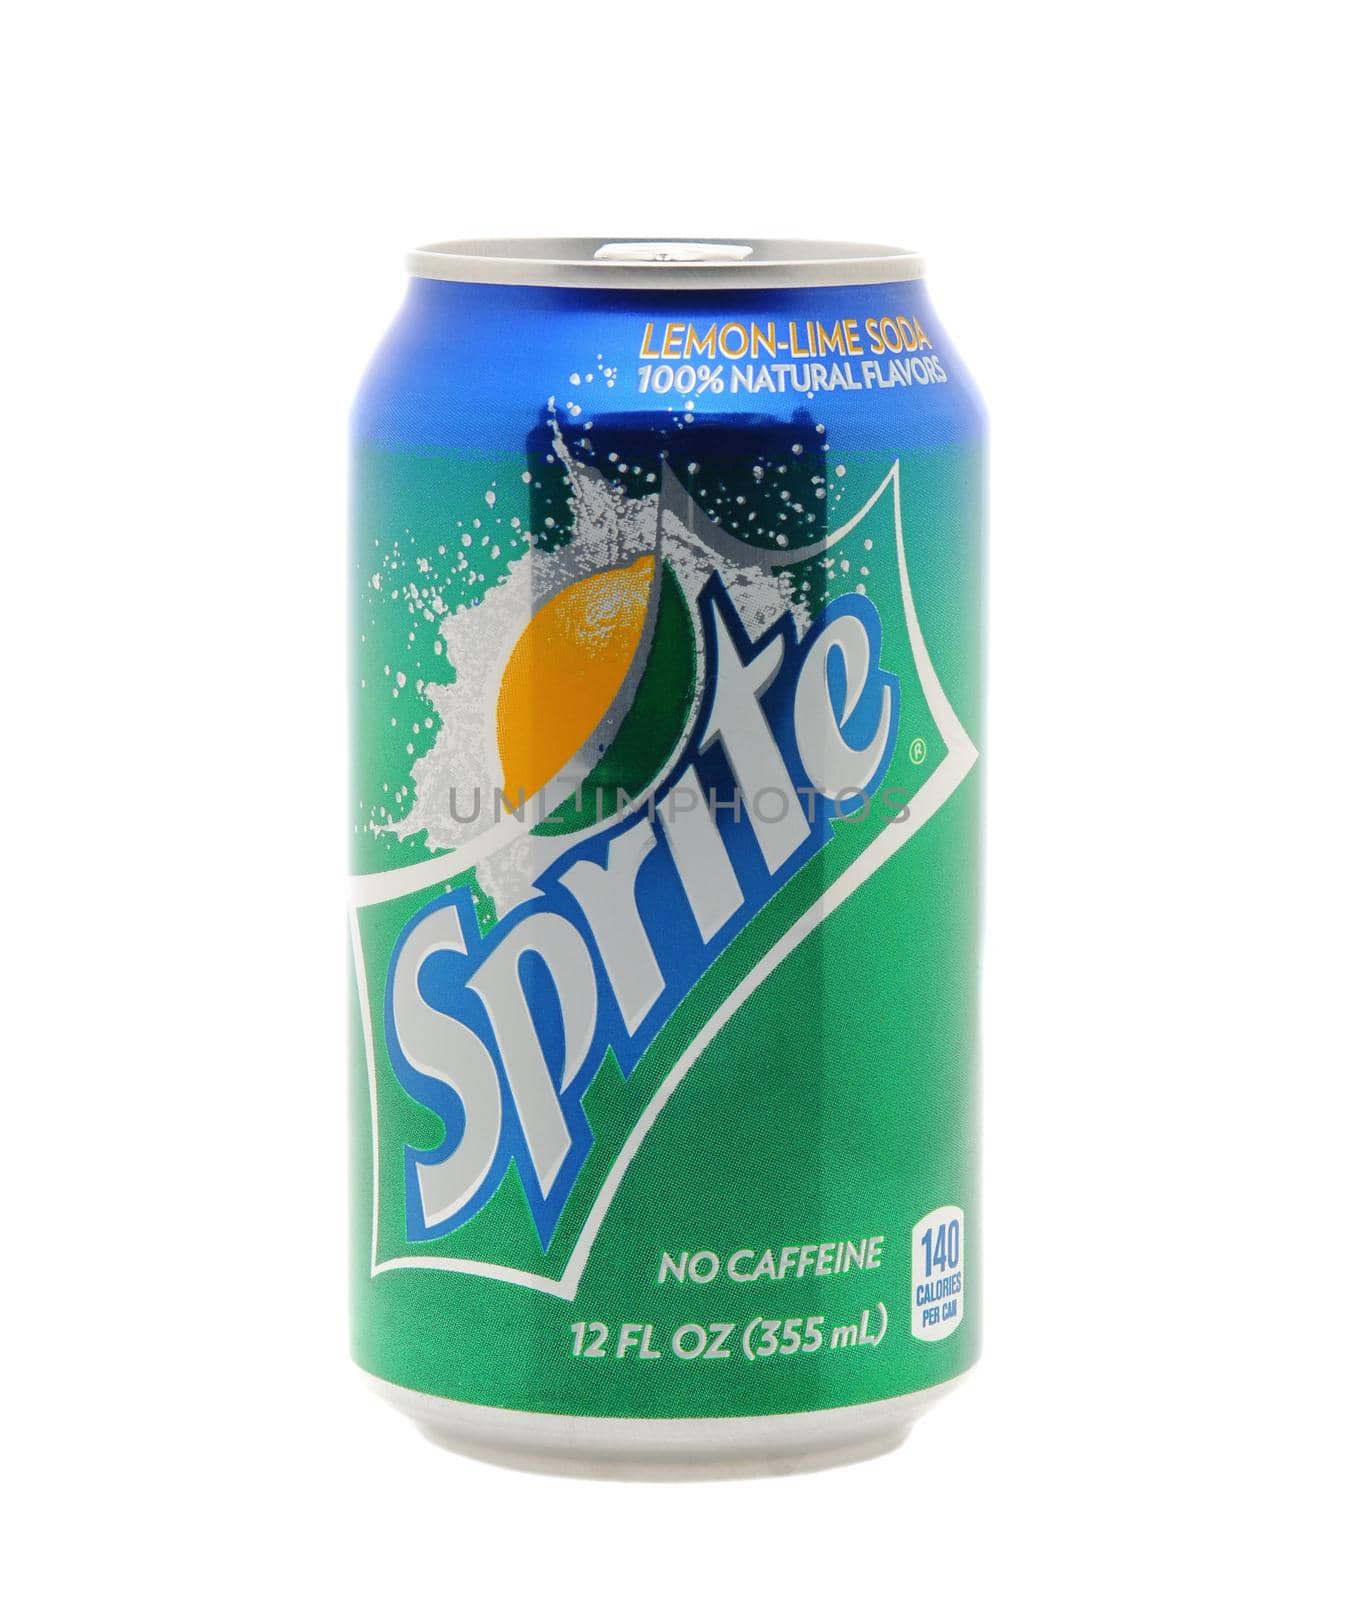 IRVINE, CA - January 11, 2013: Photo of a 12 ounce can of Sprite. Produced by the Coca-Cola Company Sprite is the leading Lemon-Lime soda brand.